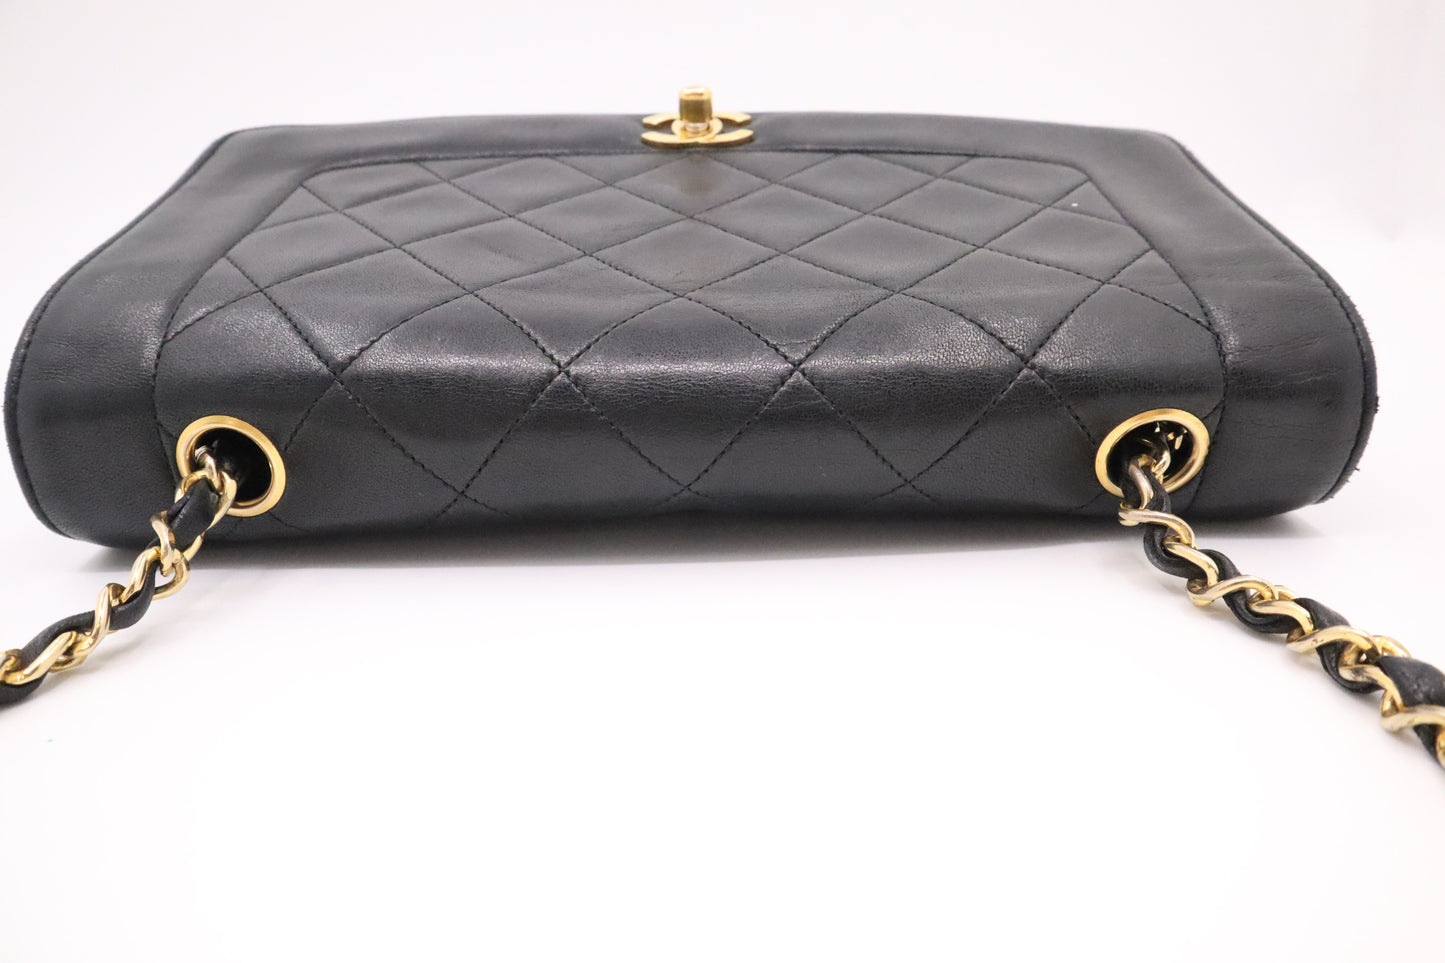 Chanel Diana in Black Leather